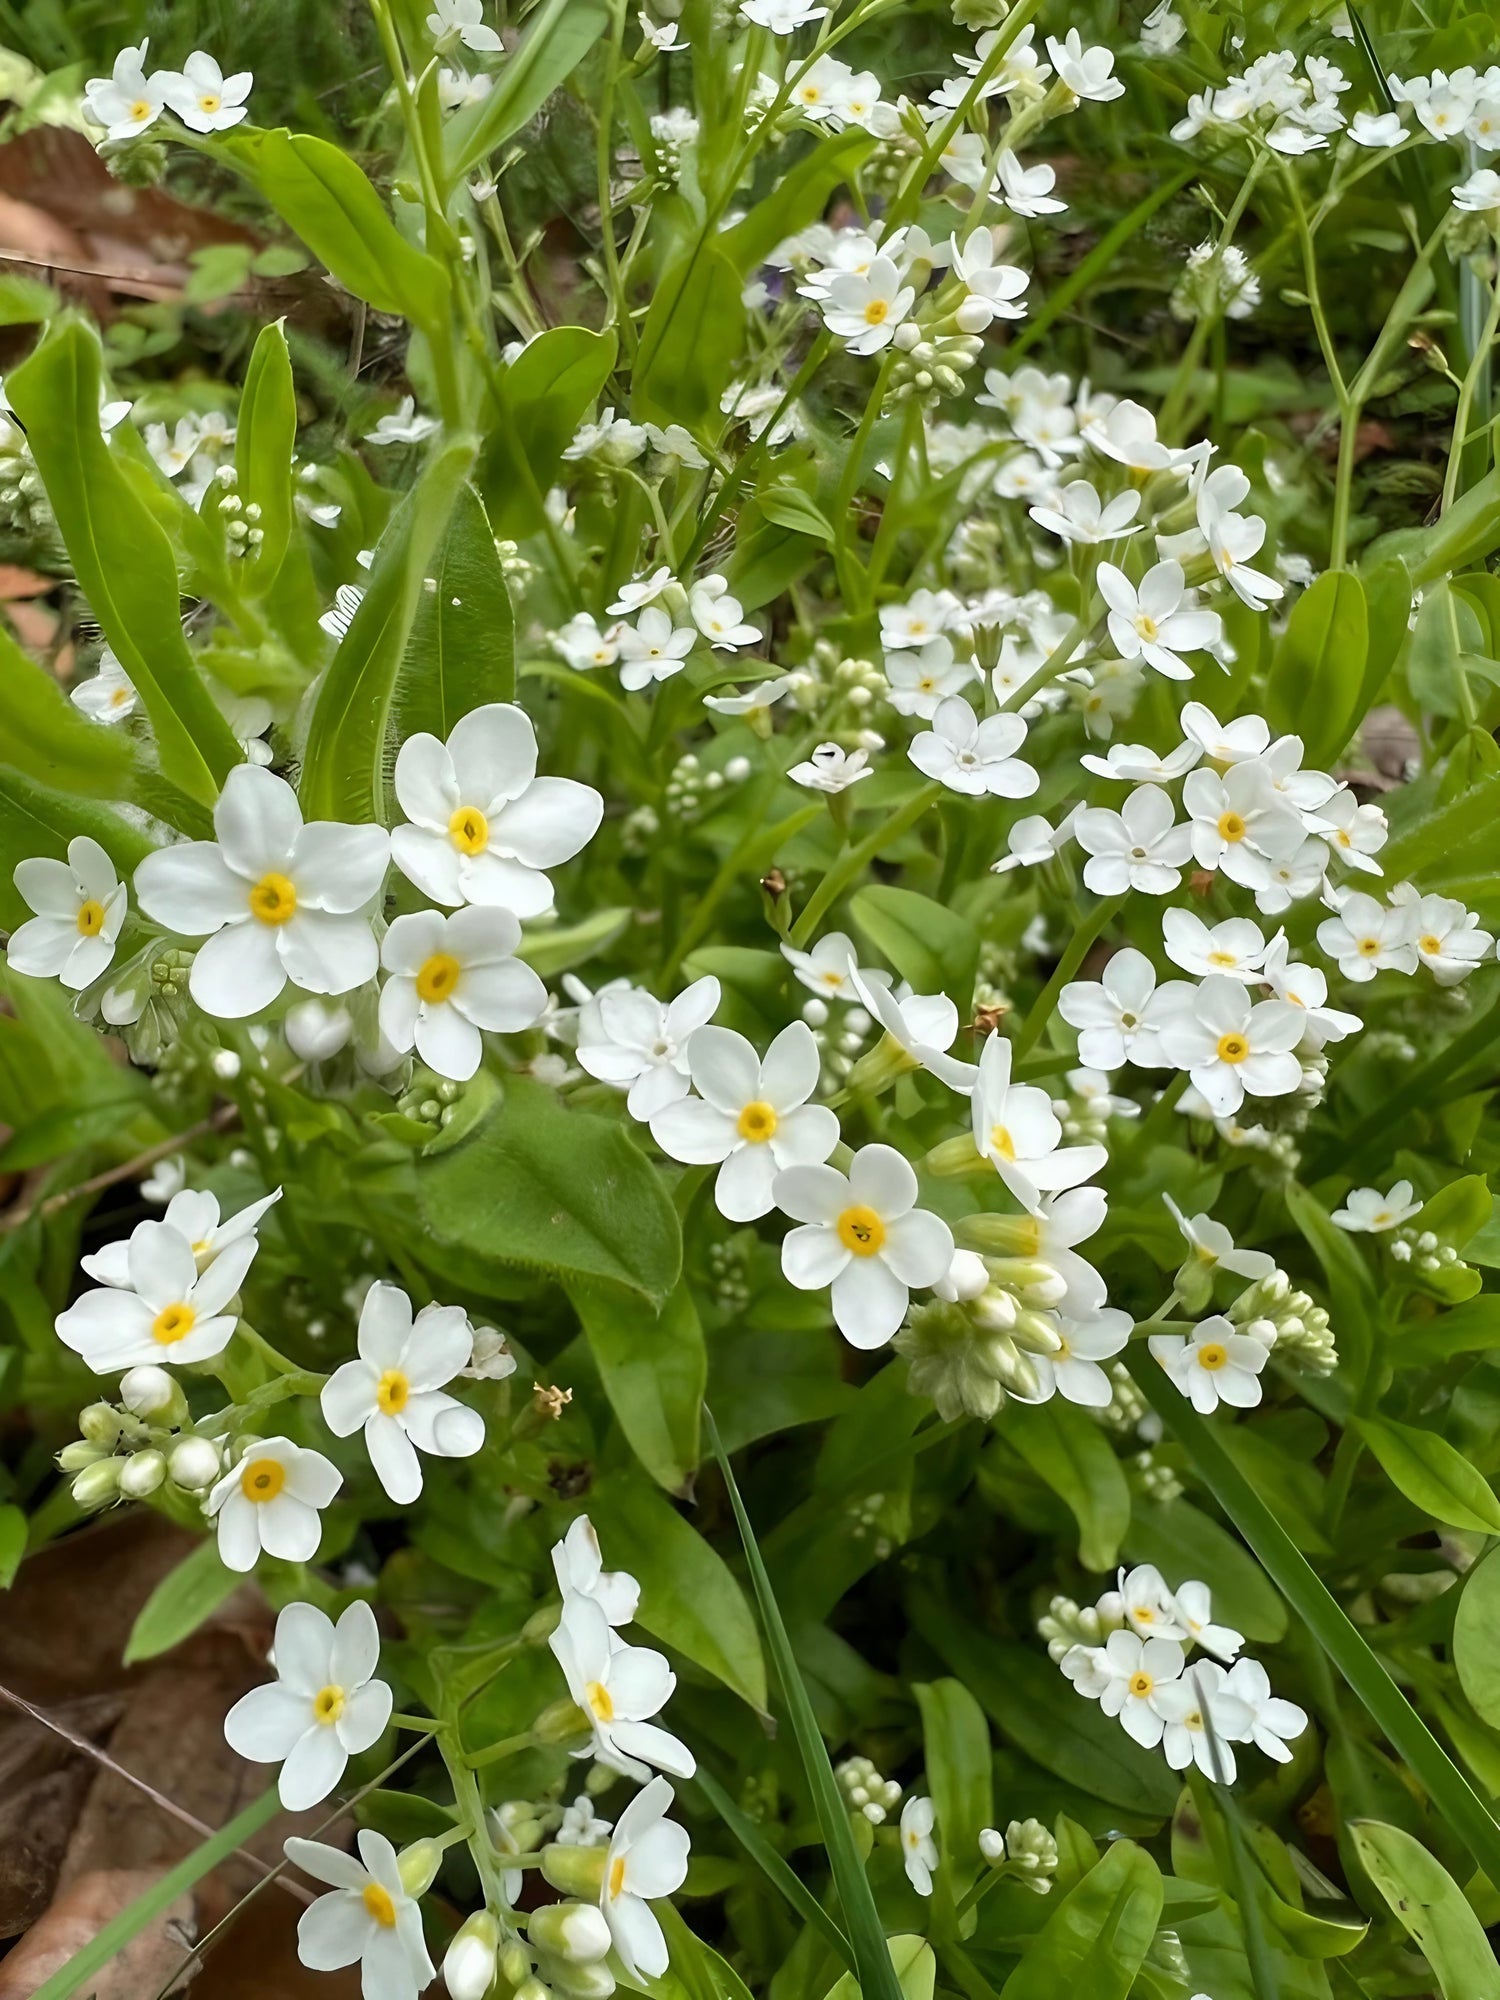 White Forget-me-nots blooming amidst green grass in a garden